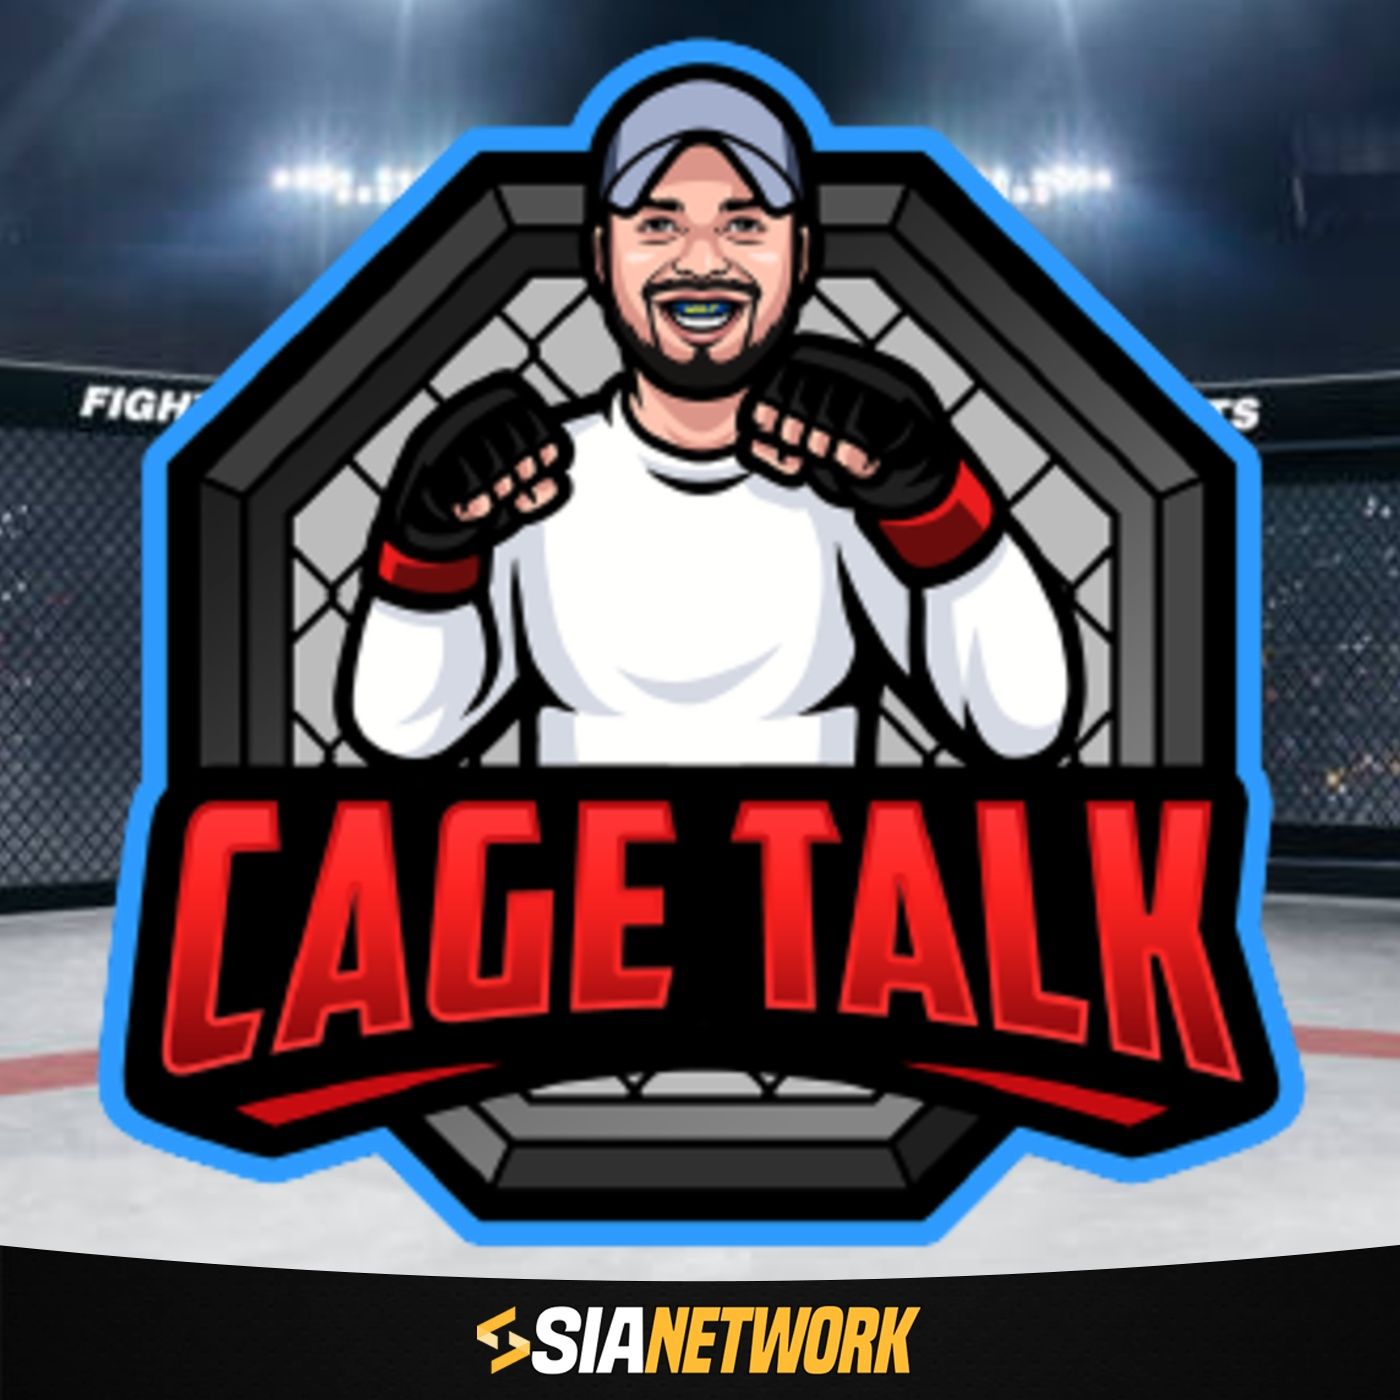 Cage Talk with Alex